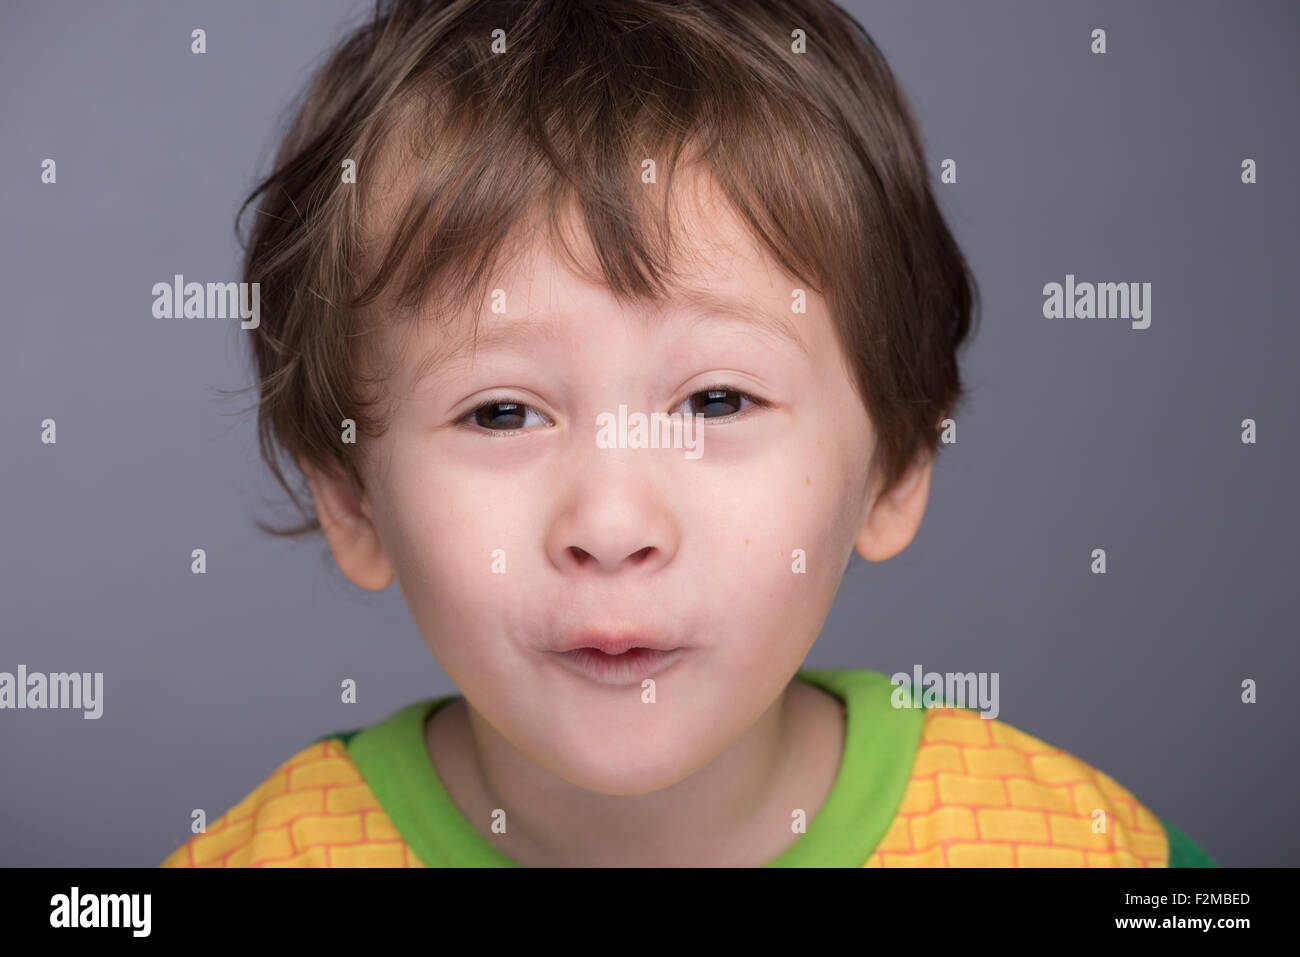 A happy 3 year old Japanese/Caucasian boy making a funny face. Stock Photo